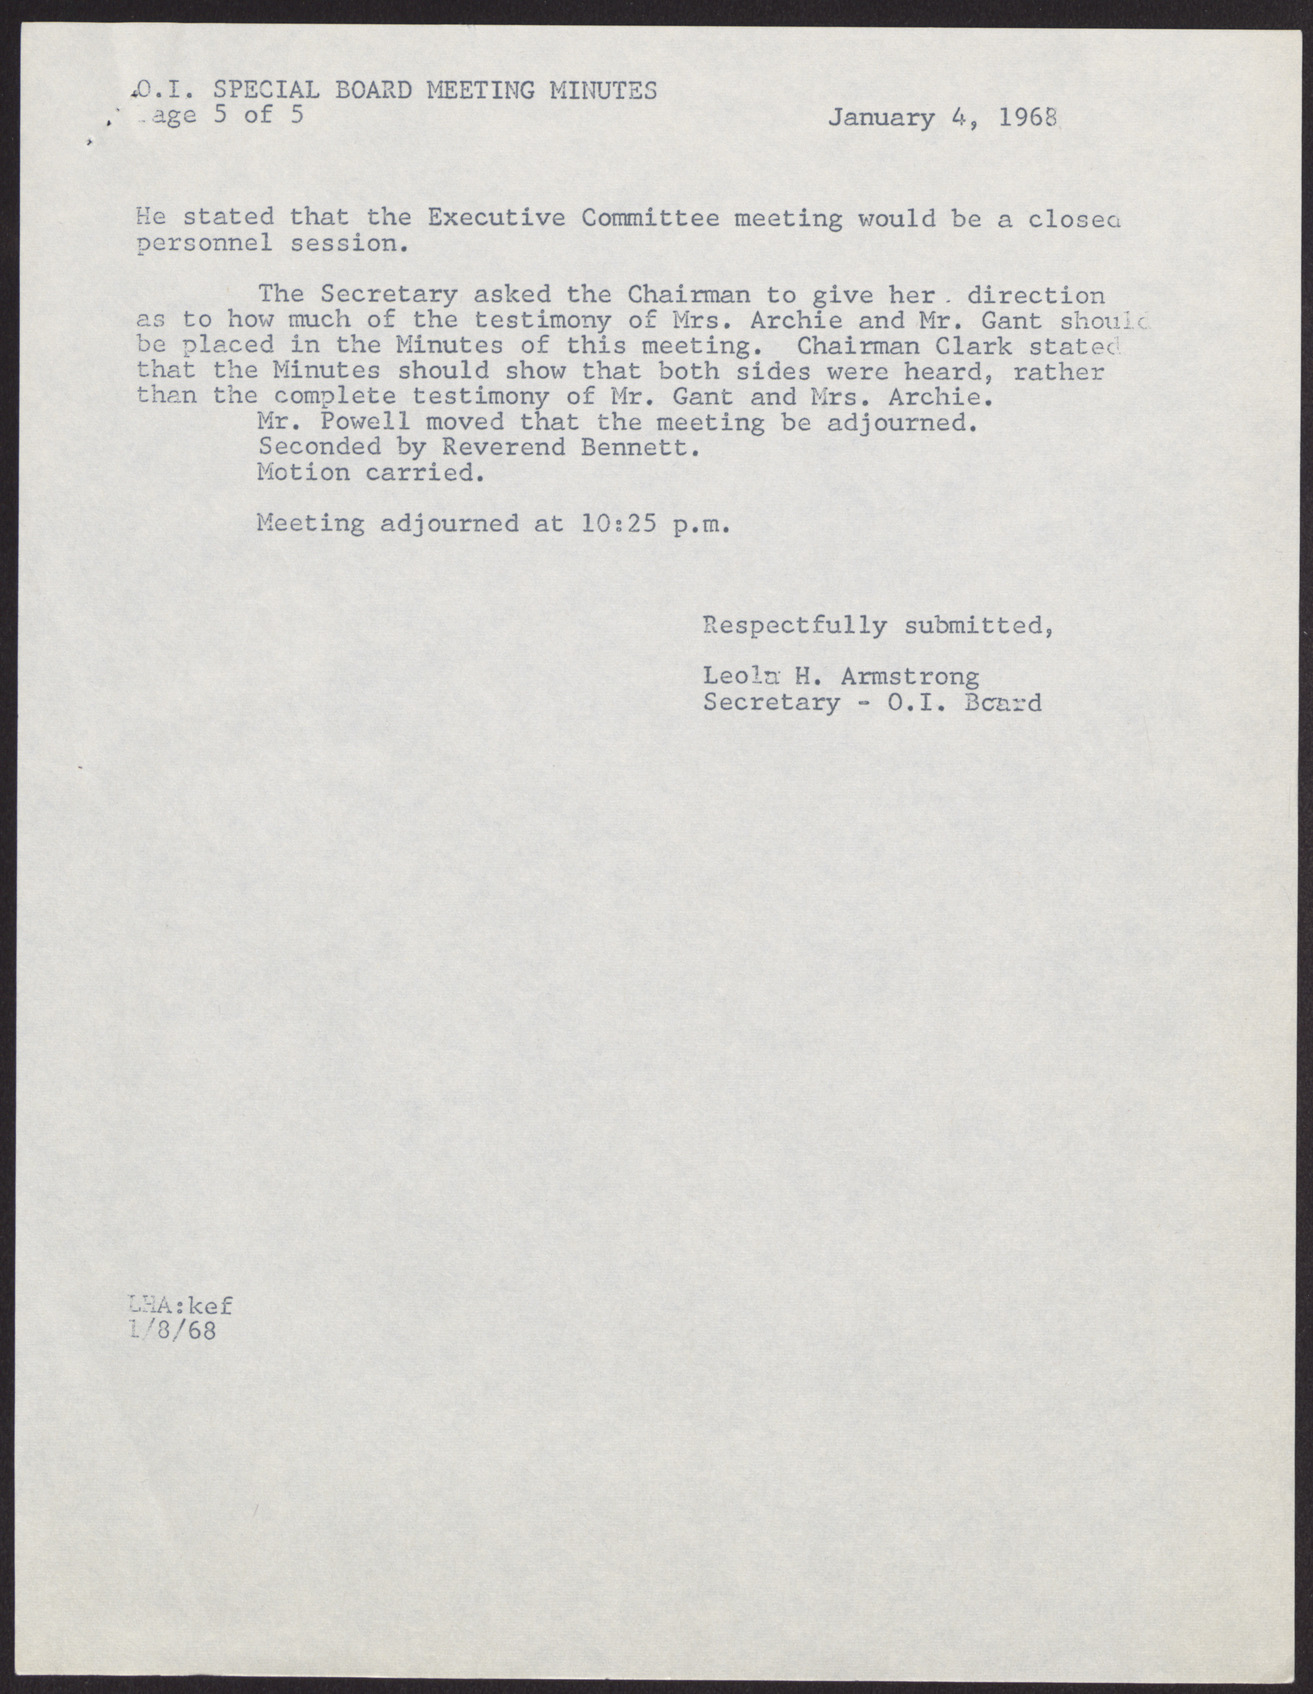 Minutes of Special Meeting of Operation Independence Board (5 pages), January 4, 1968, page 5